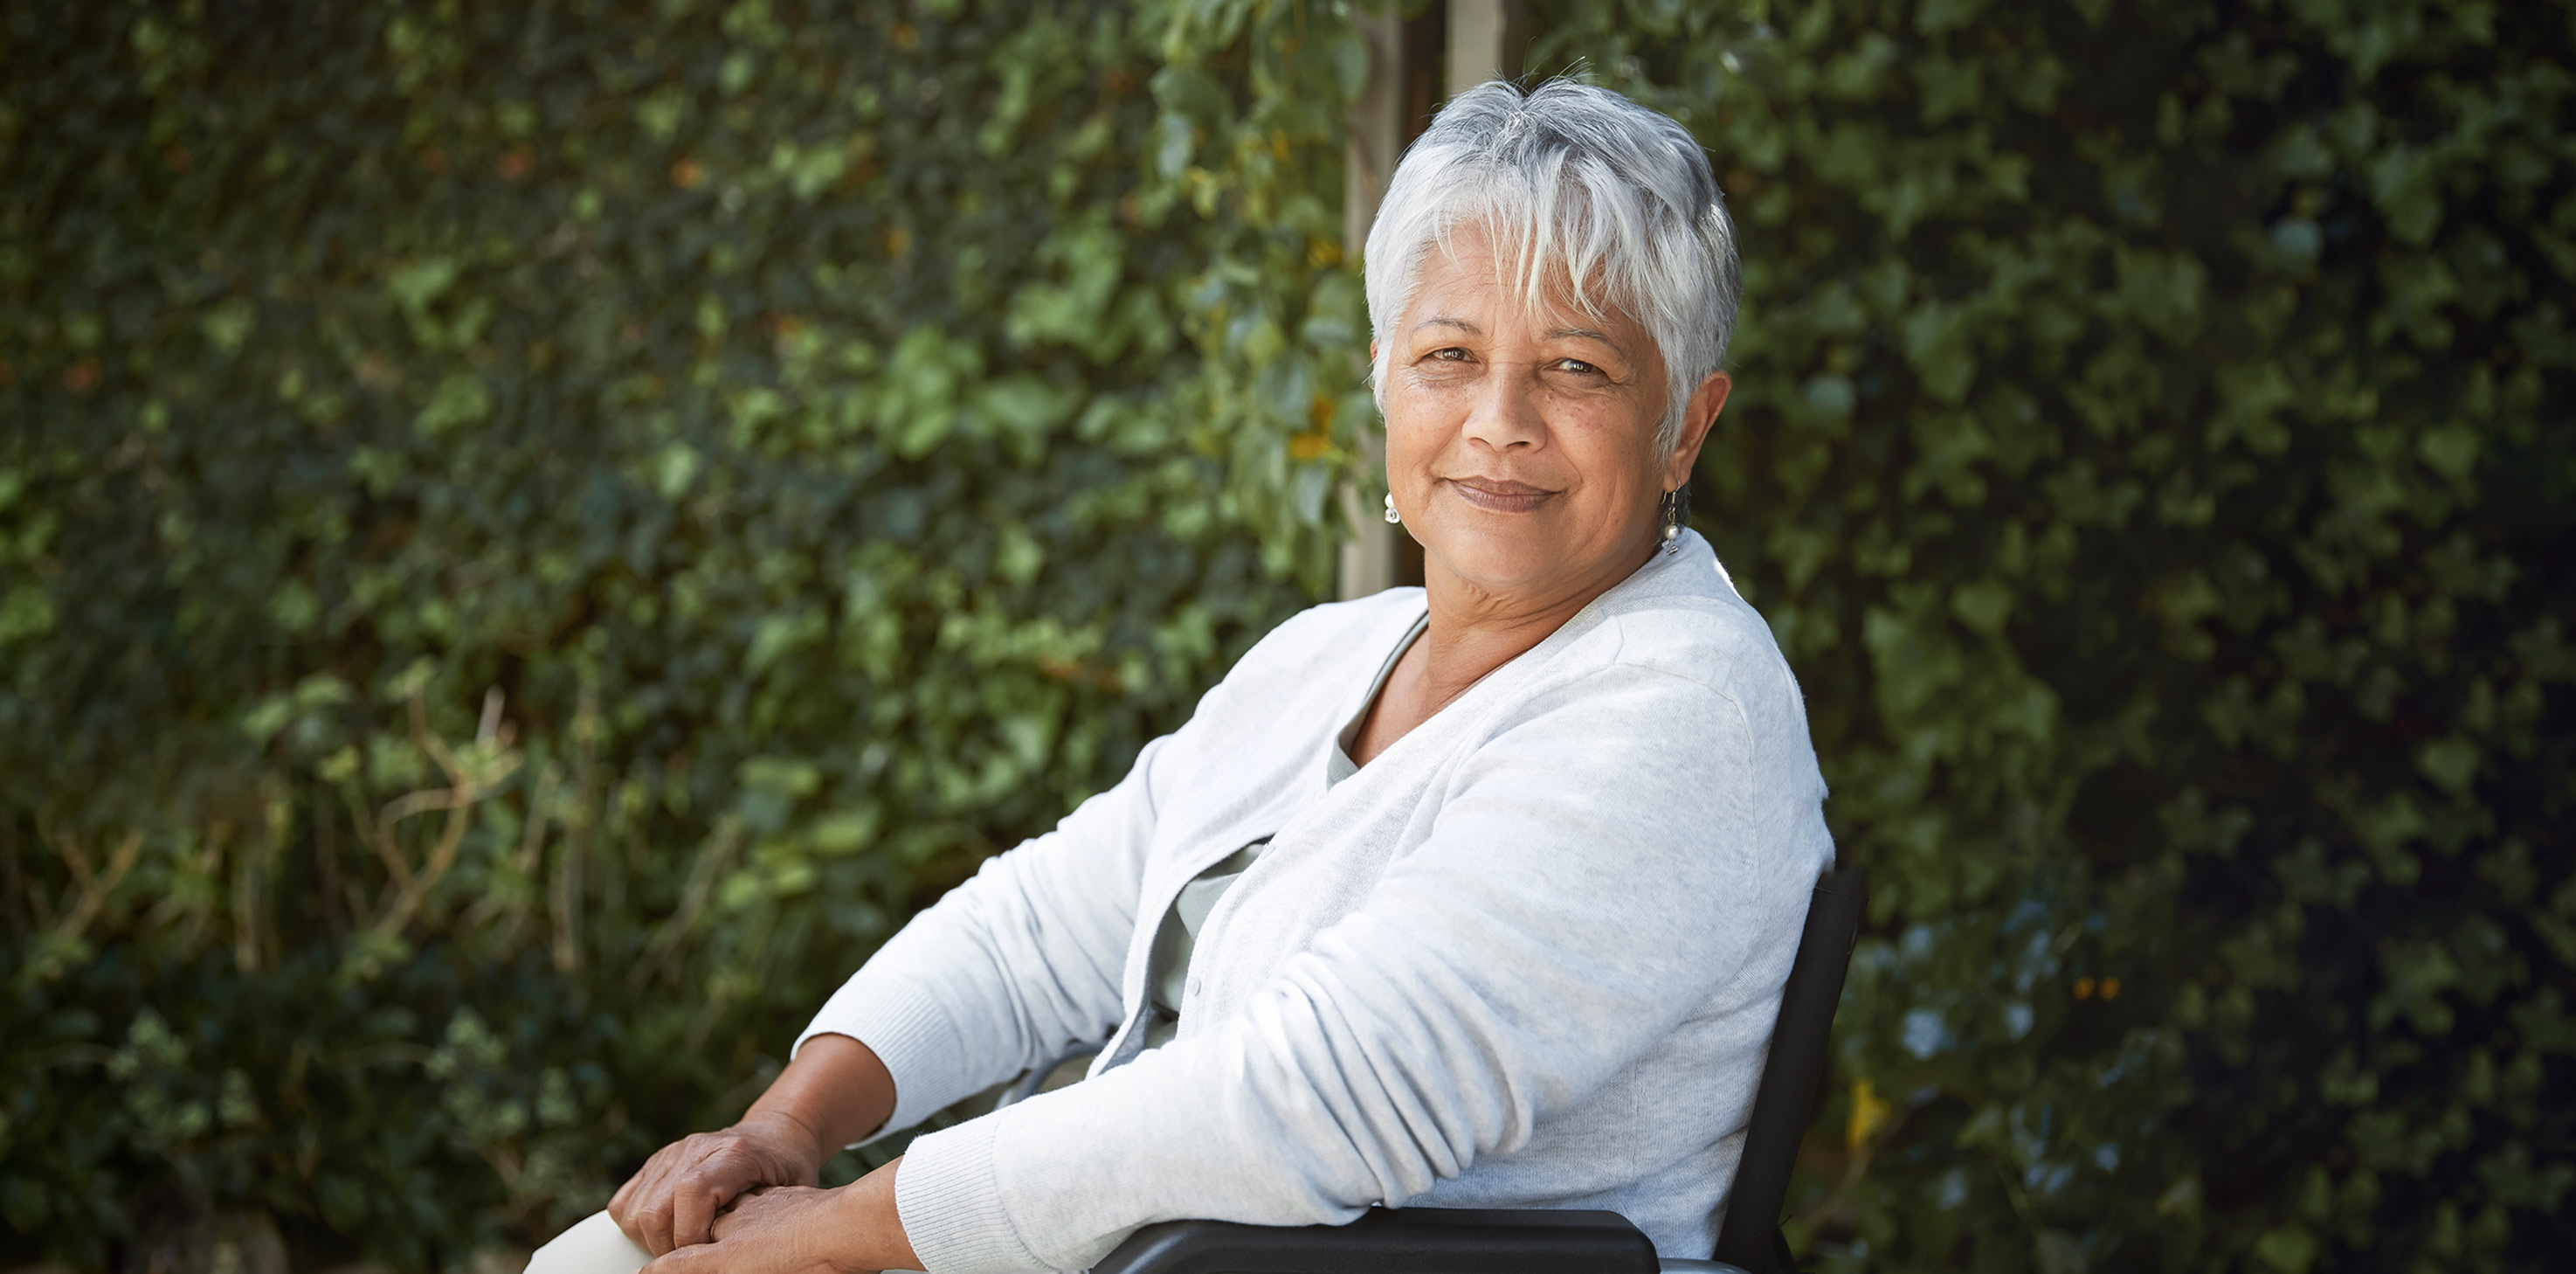 A headshot of a grey-haired woman of South Asian descent, sitting in a wheelchair and smiling softly at the camera.